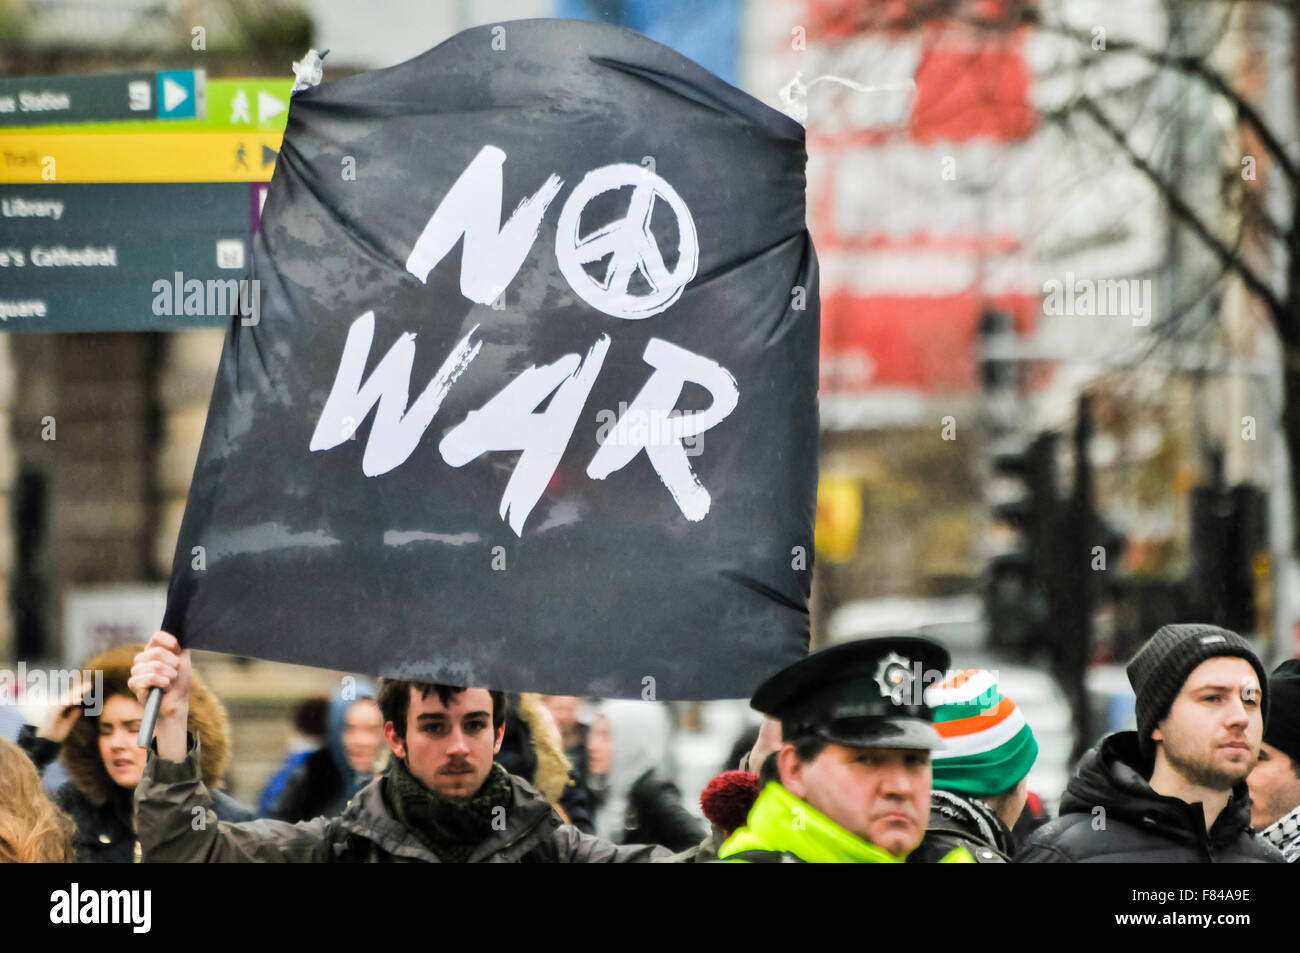 Belfast, Northern Ireland. 05 Dec 2015 - A man holds up a banner which says 'No War' (with the CND symbol) at a protest rally  Credit:  Stephen Barnes/Alamy Live News Stock Photo